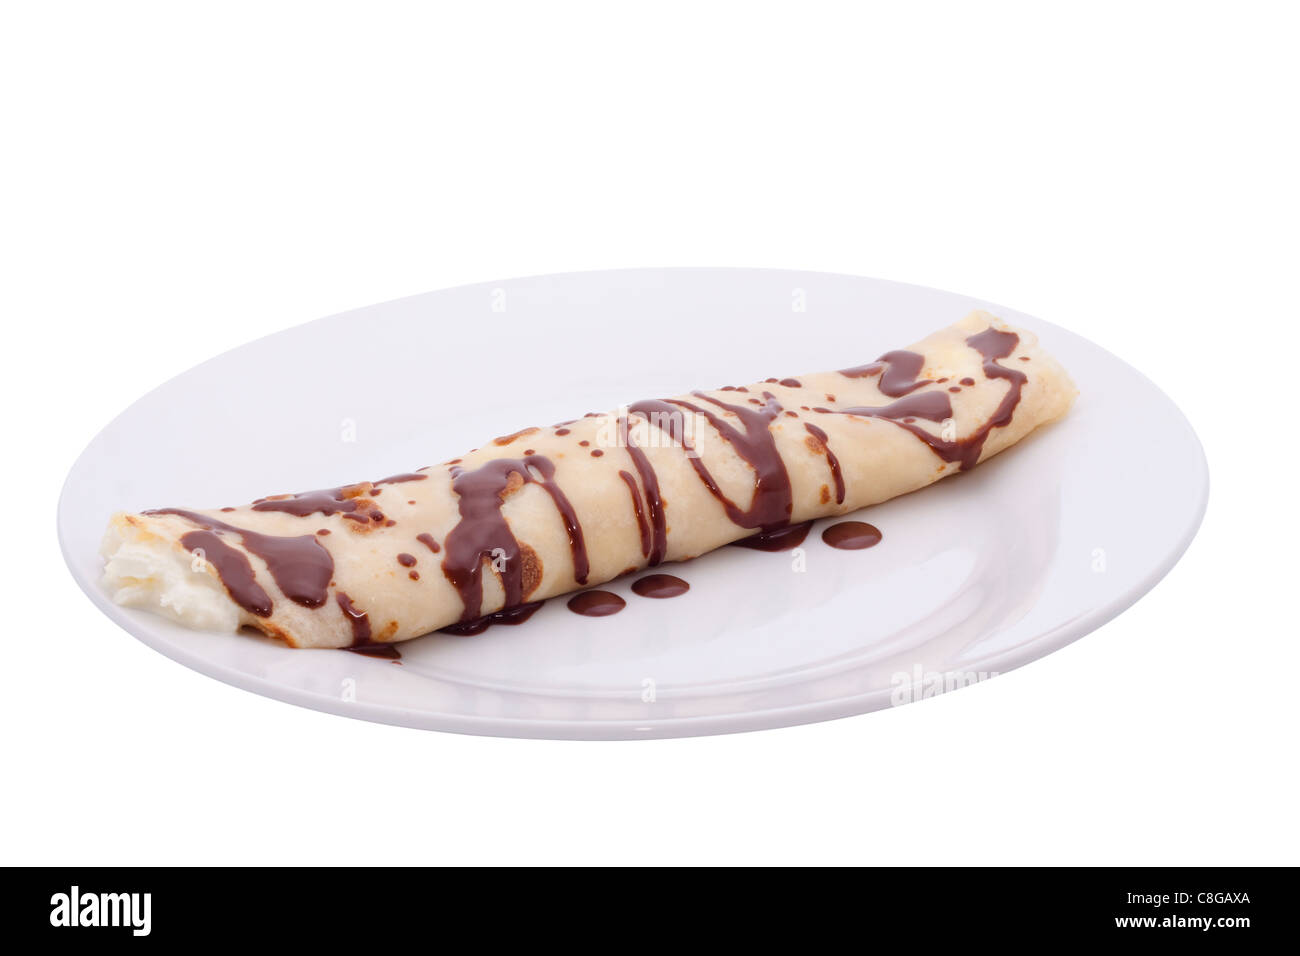 Rolled crepe with cream and chocolate, isolated on white background. Stock Photo